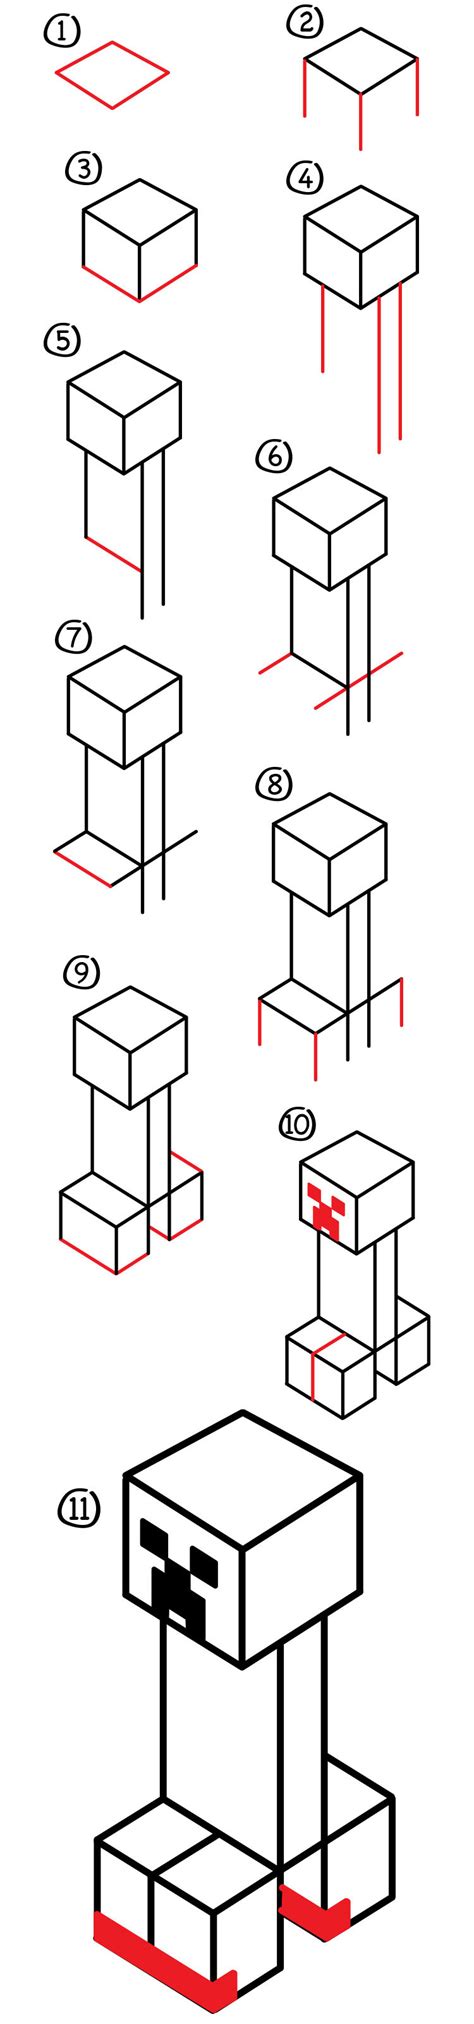 How to draw a minecraft creeper - Drawing tutorials. Paper crafts. Puzzle games. Calendars & Holidays. ... Creeper Minecraft Papercraft . Alex Minecraft Papercraft Enderman Minecraft Papercraft . Categories: Minecraft Papercraft Toys. Original image credit: coolskeleton953 on deviantart.com. Permission: This artwork is displayed with permission of the author. For pesonal use only.